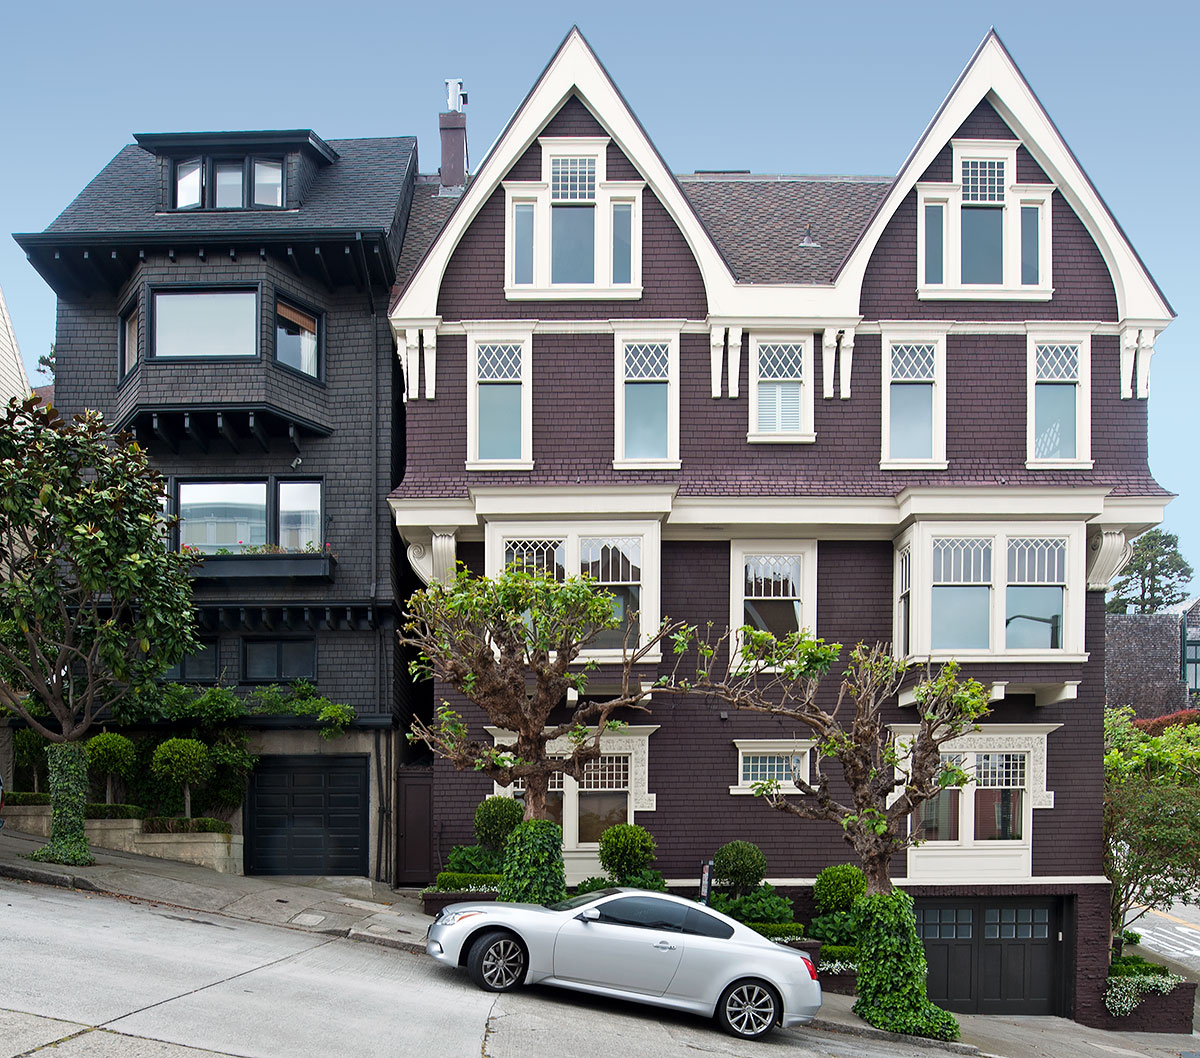 2629 and 2647-2651 Pierce Street in Pacific Heights was designed by Newsom & Newsom and built in 1904.